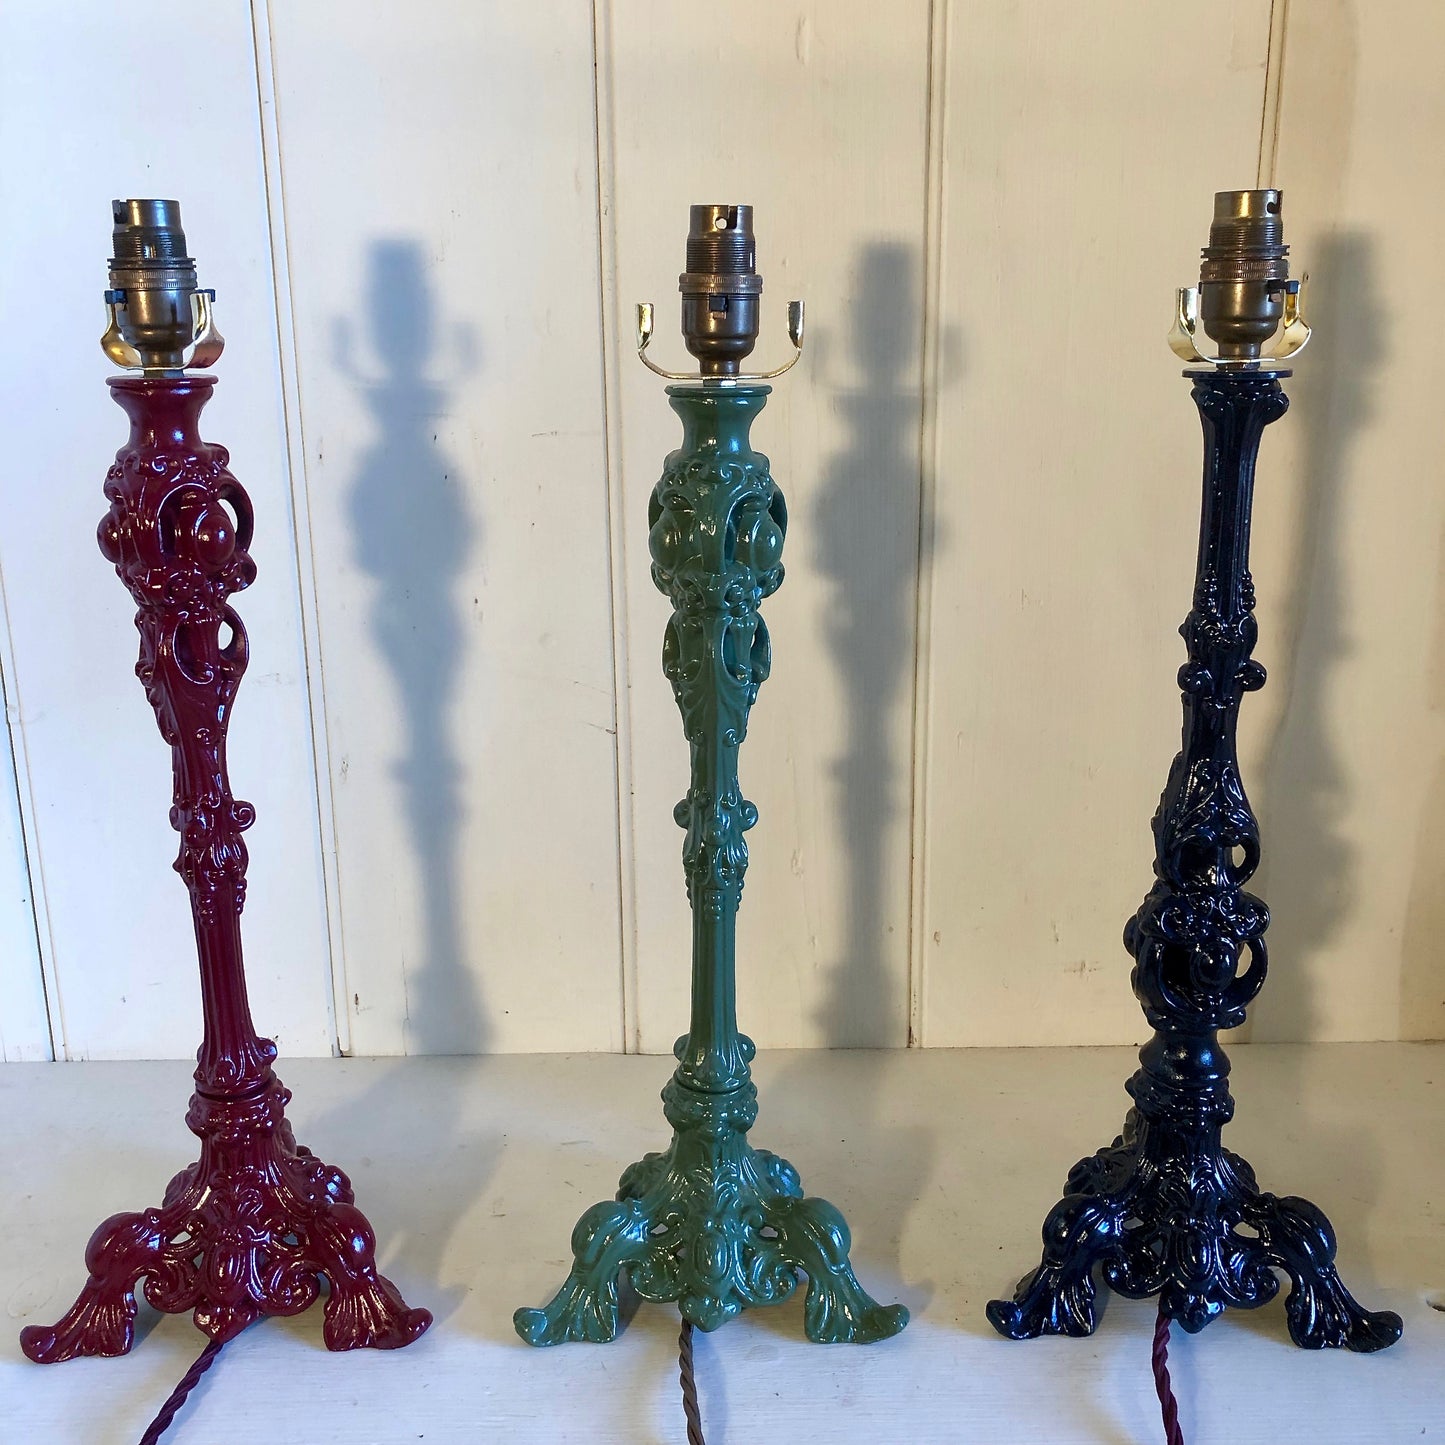 CAST STEEL TABLE LAMP BASES